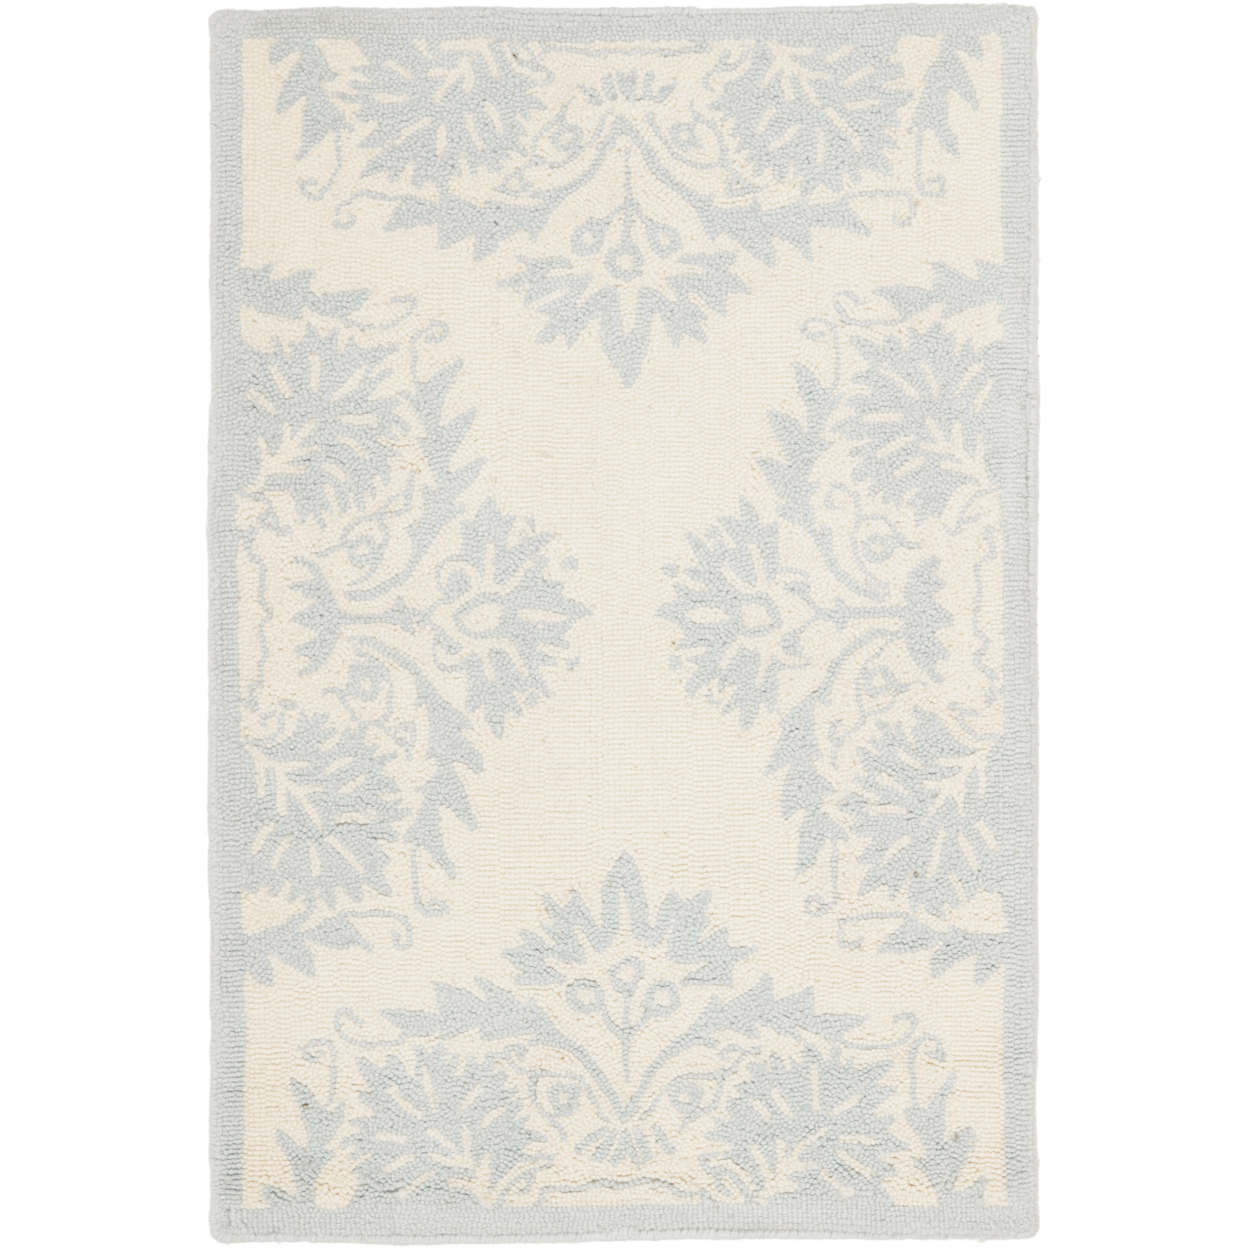 SAFAVIEH Chelsea HK359A Hand-hooked Ivory / Blue Rug - 2' 6 X 4'